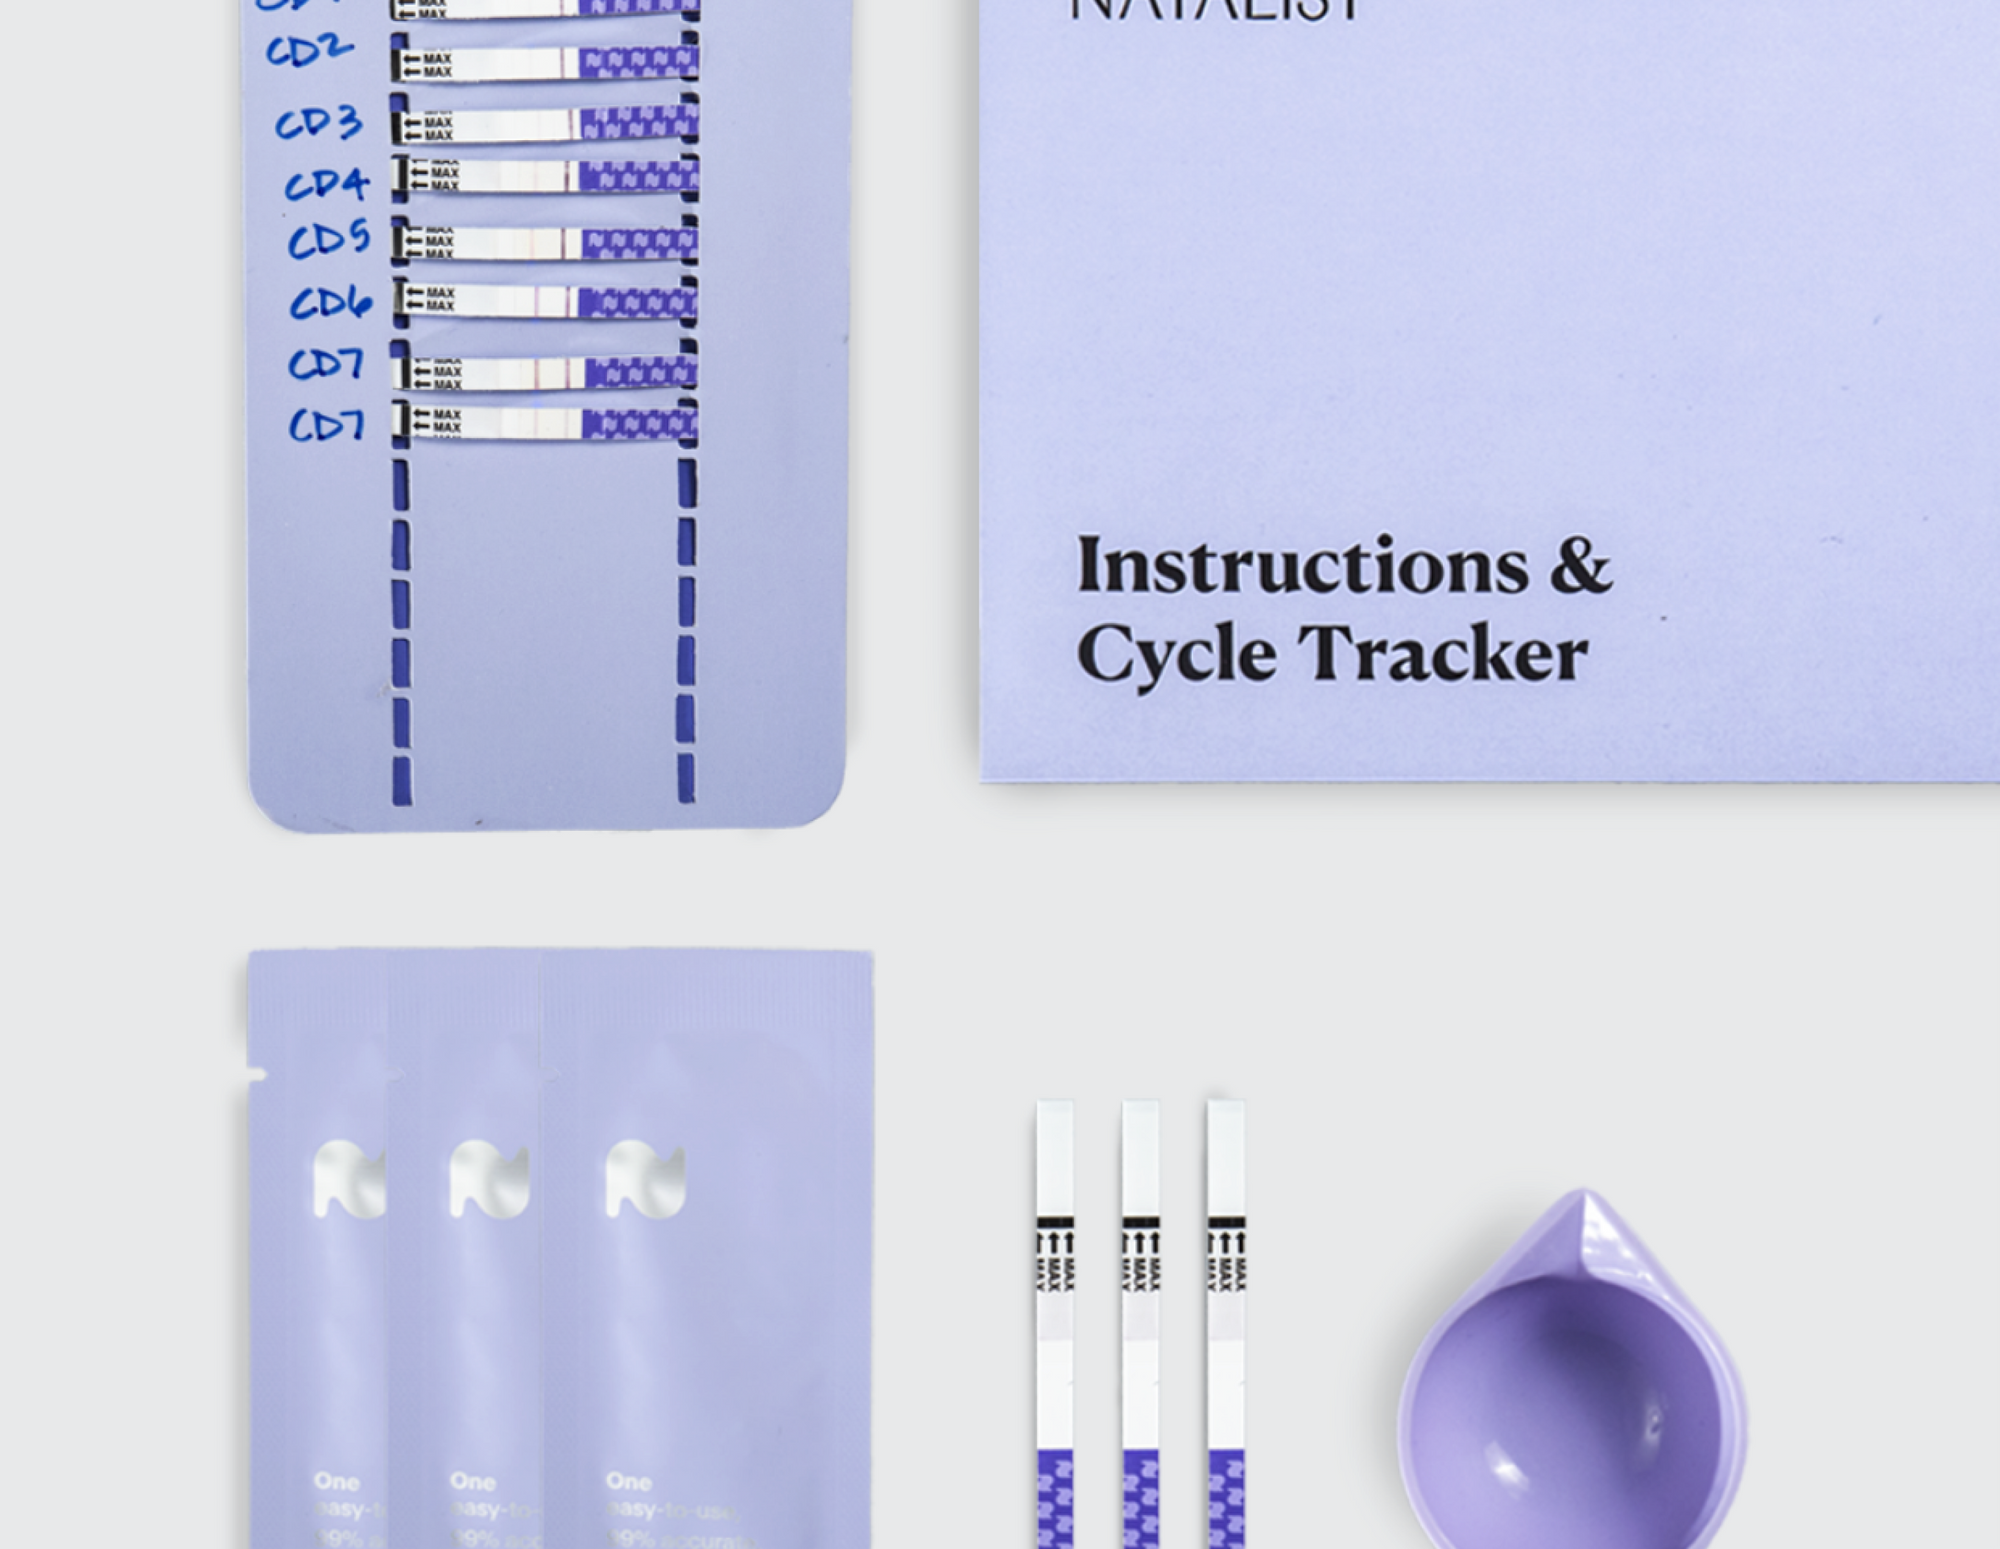 Natalist ovulation strips package contents including urine cup, cycle tracker, test strips, and instructions